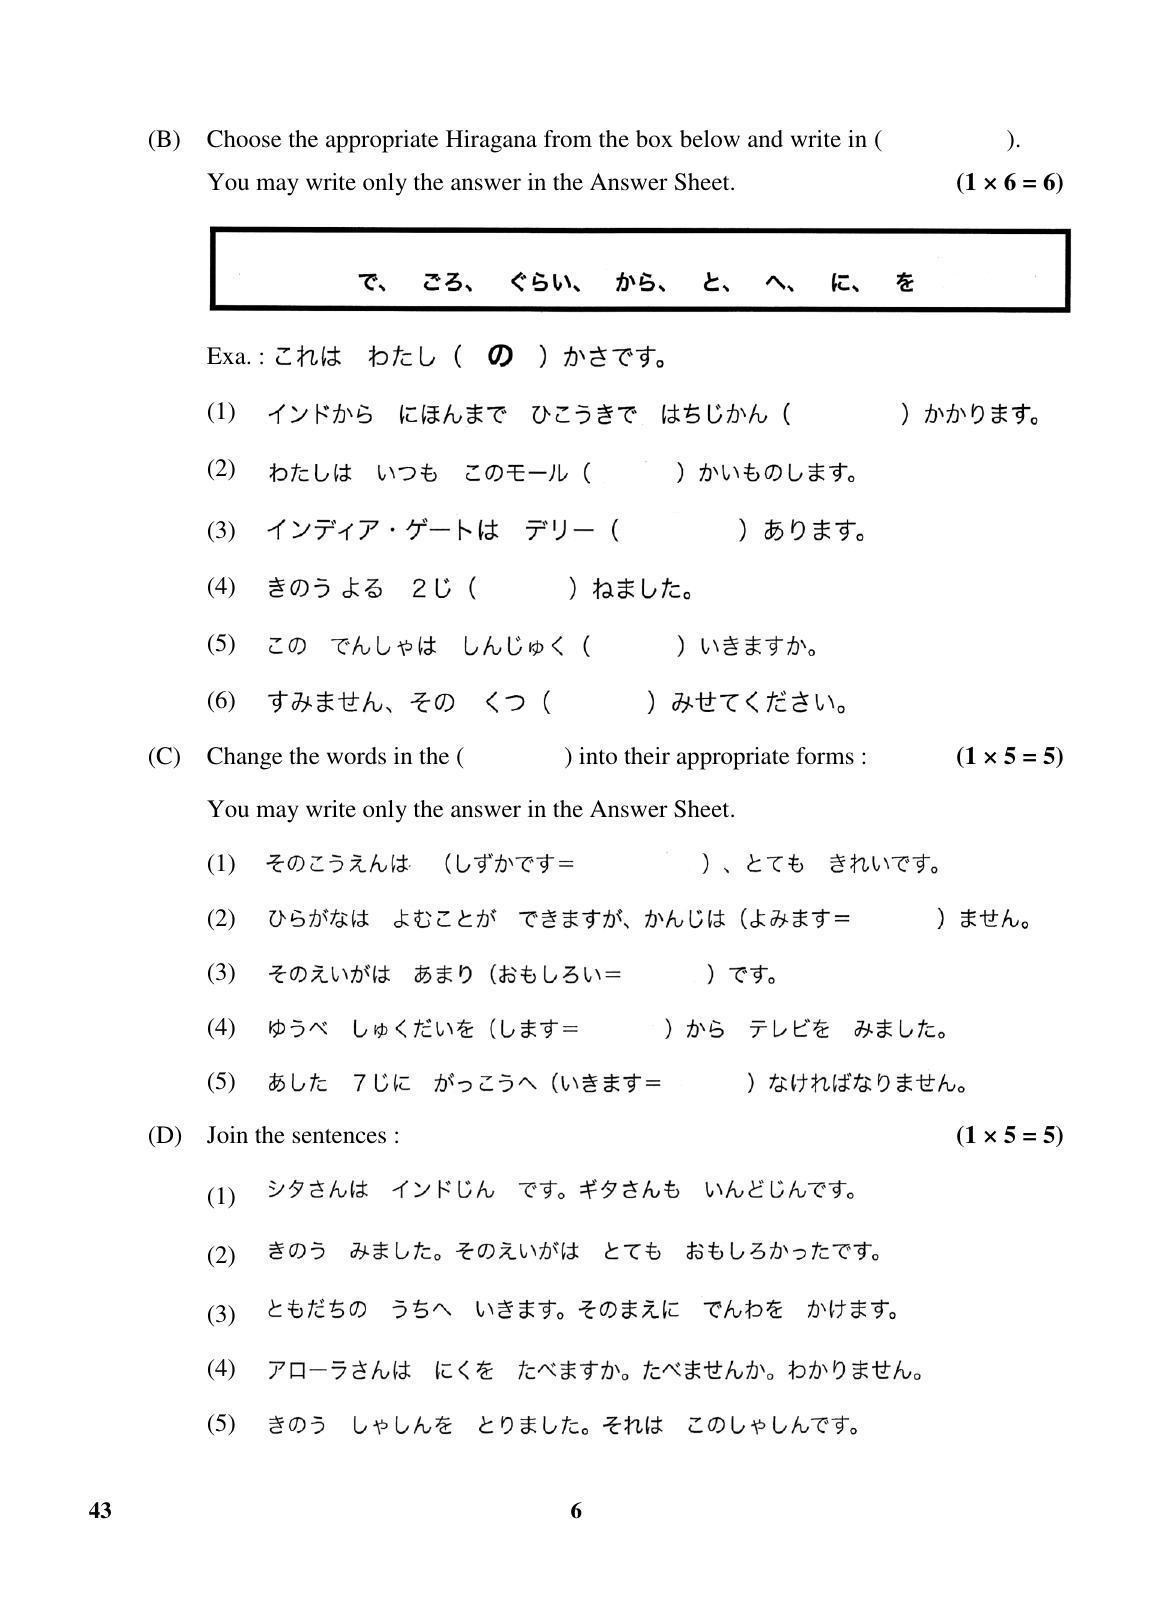 CBSE Class 10 43 (Japanese) 2018 Question Paper - Page 6